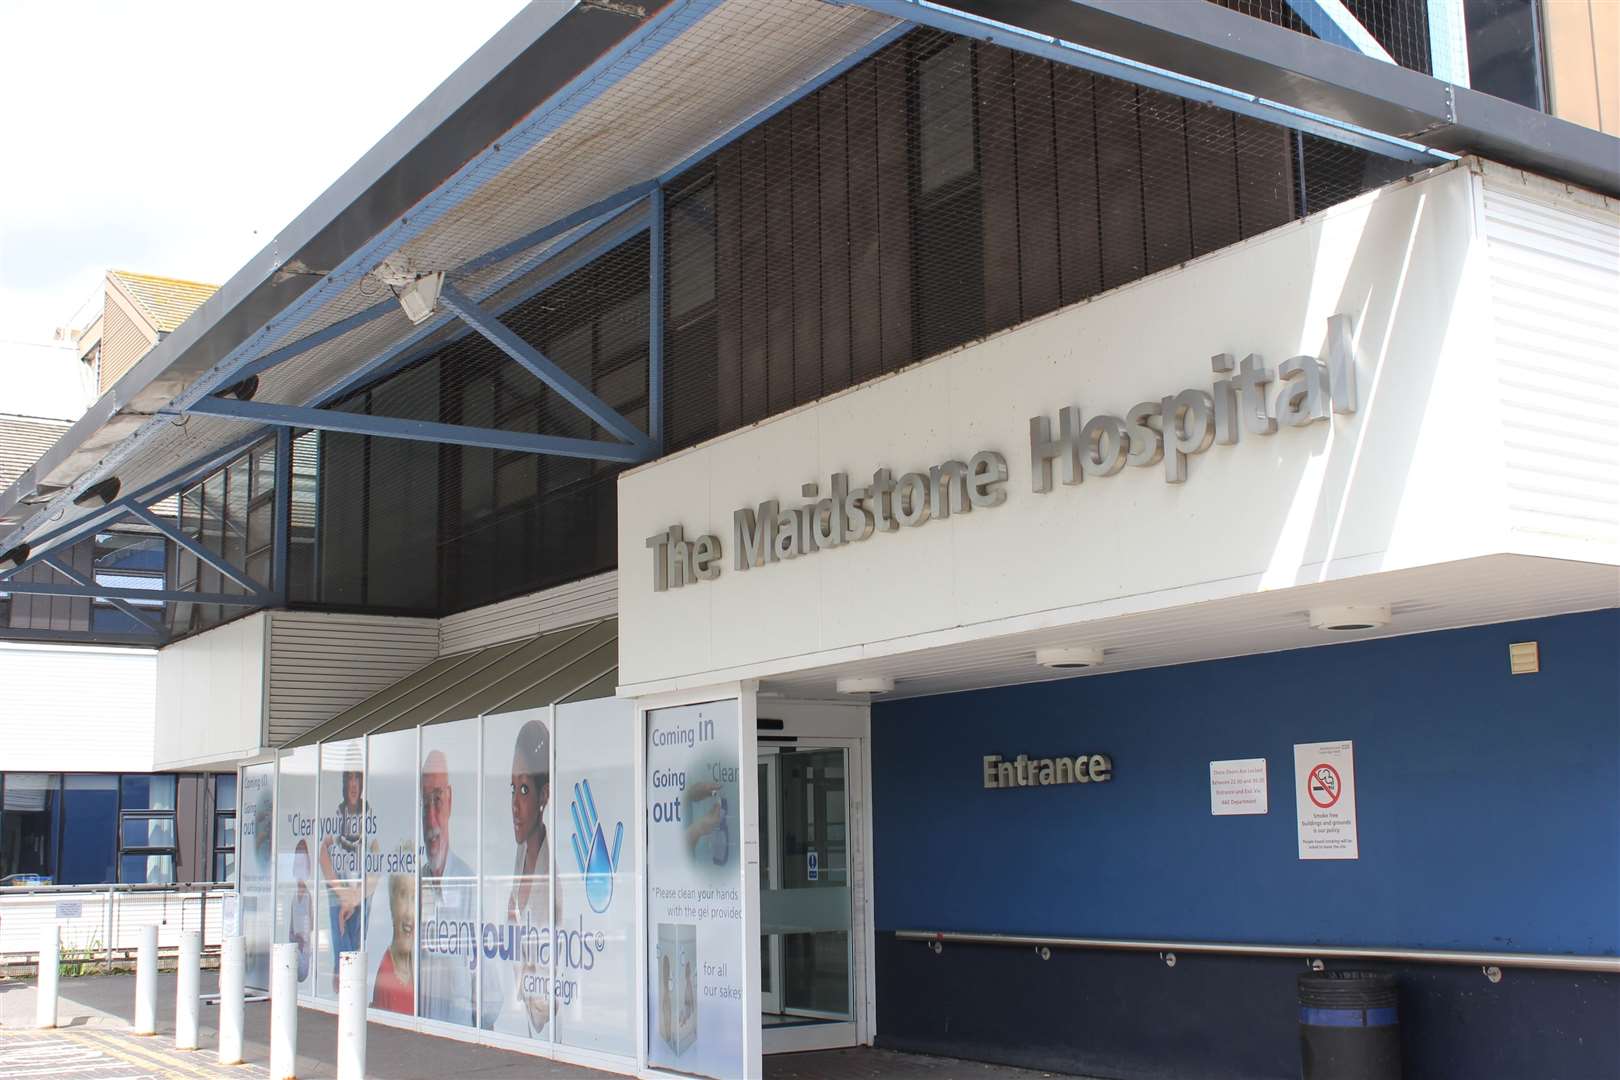 The theft happened in Maidstone hospitals multi-storey car park